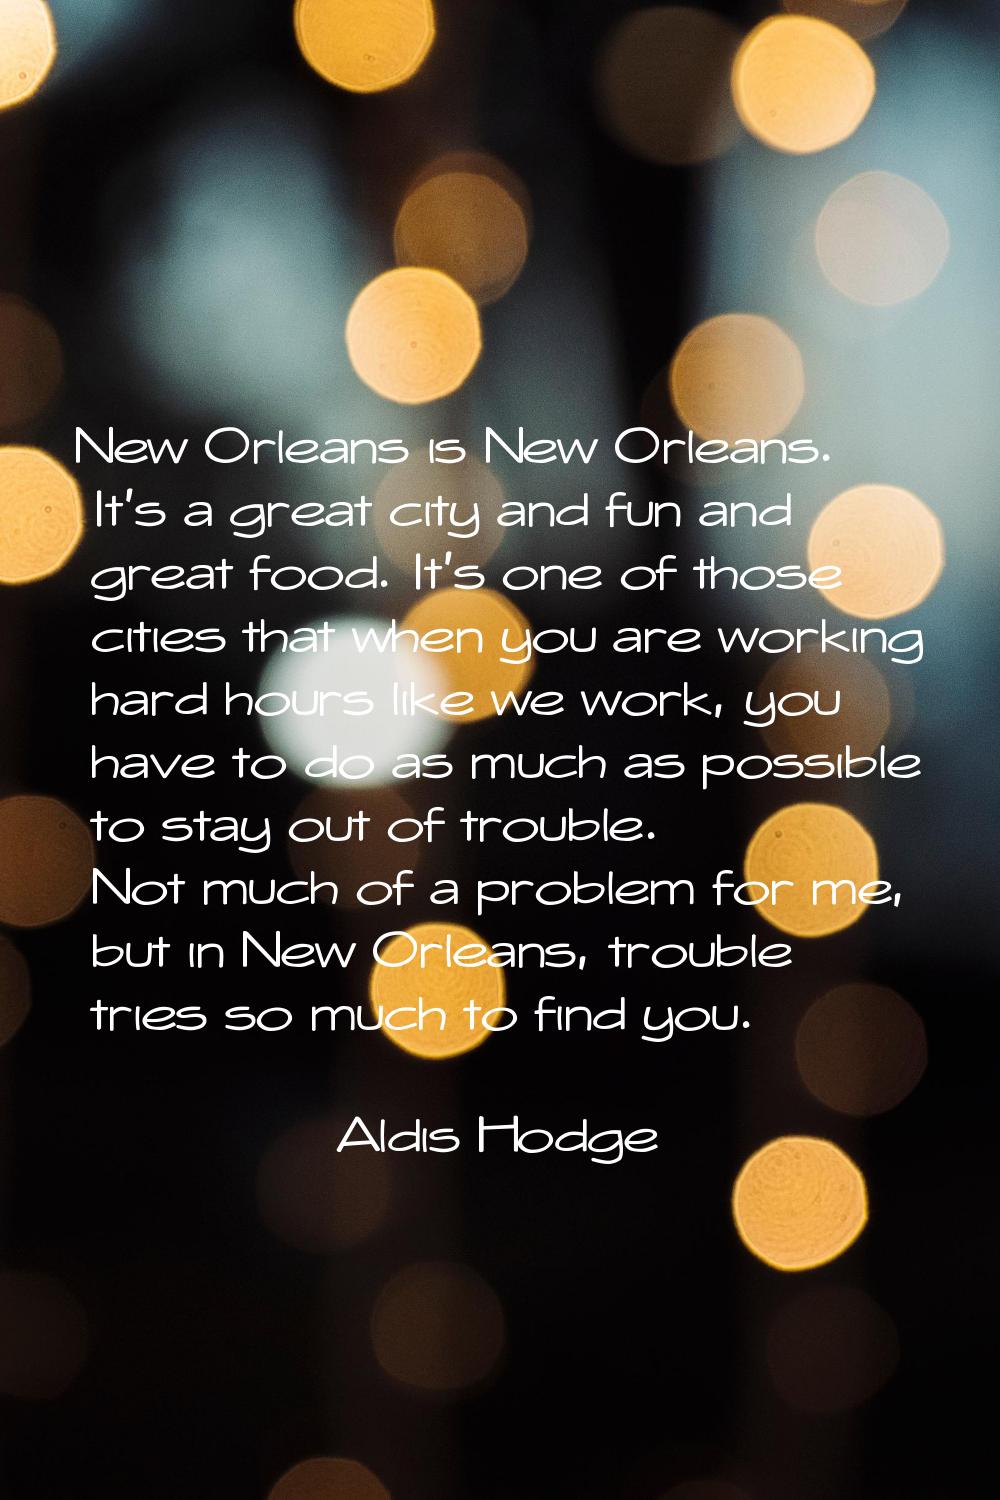 New Orleans is New Orleans. It's a great city and fun and great food. It's one of those cities that